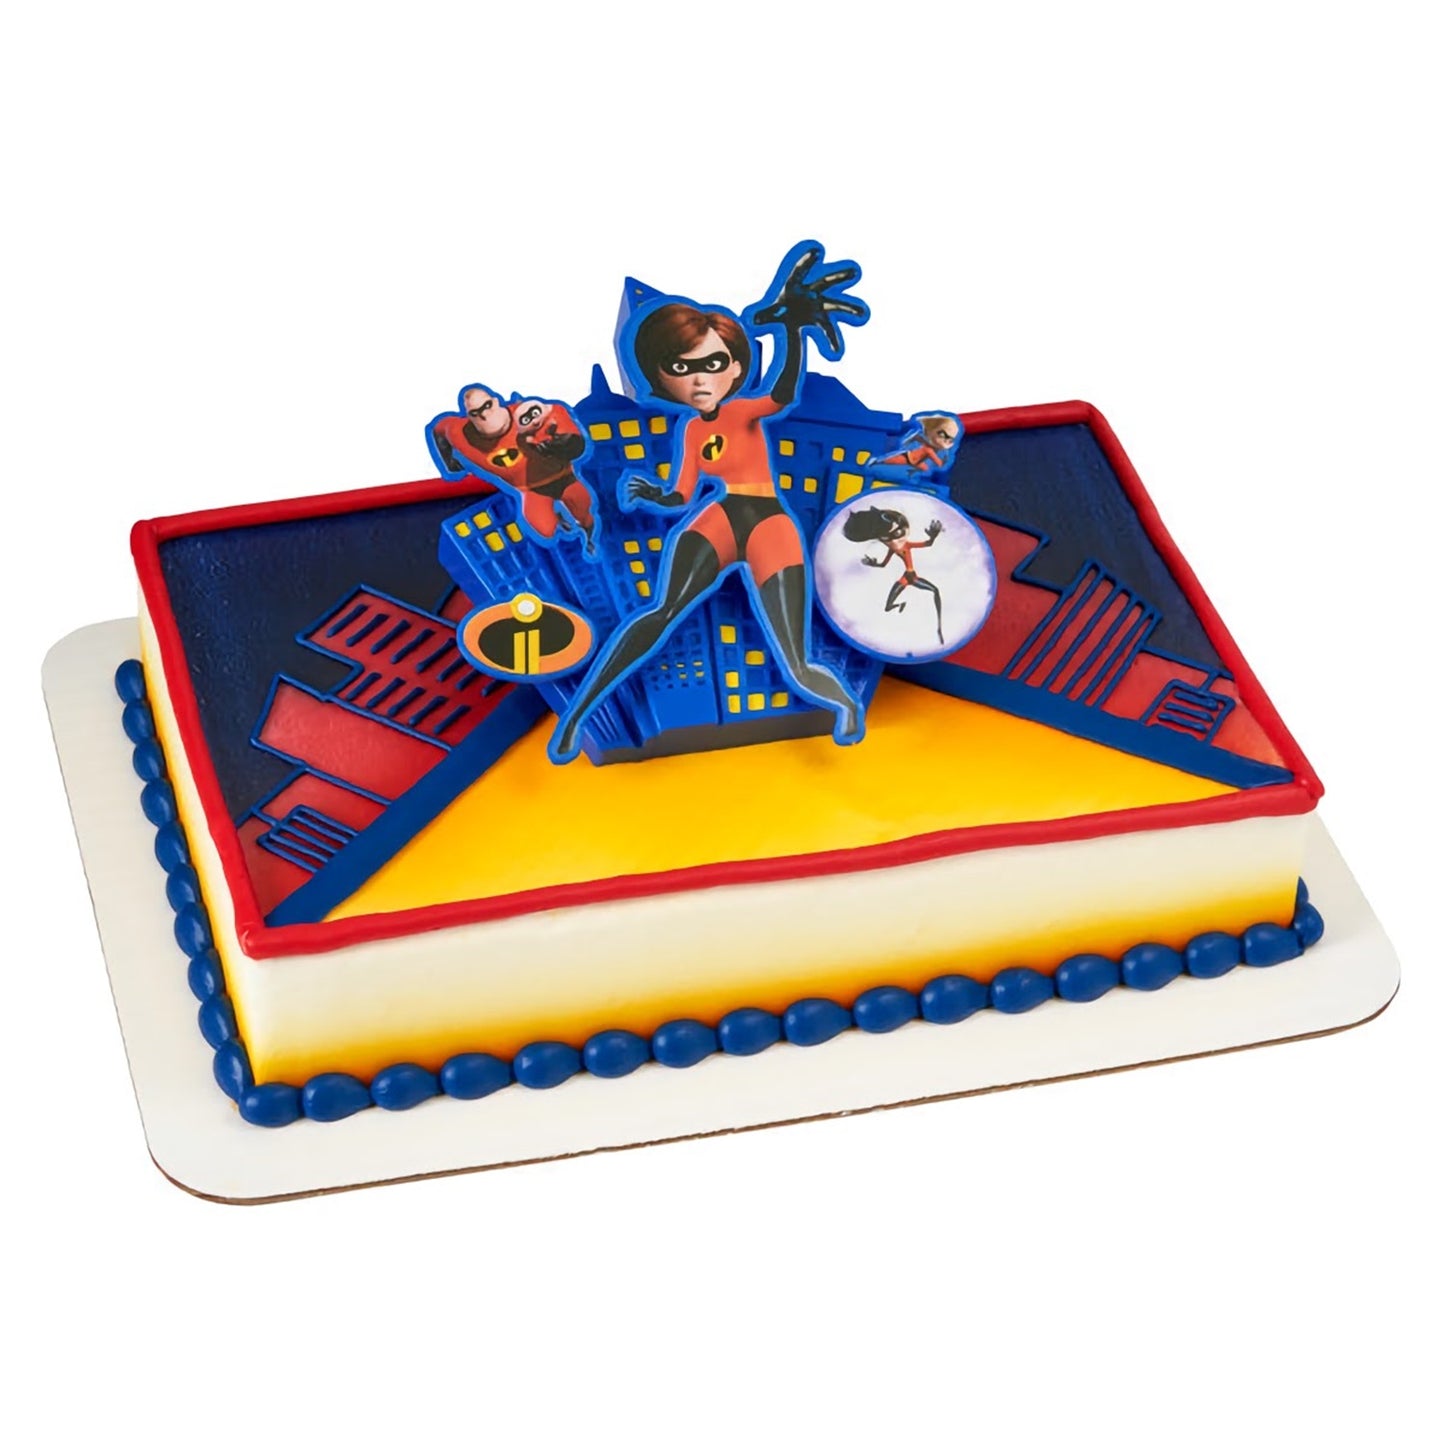 Rectangular cake with 'Incredibles 2' theme, showcasing the family in action with 3D figures of Mr. Incredible, Elastigirl, and Violet on a cityscape fondant backdrop with a yellow to red gradient icing.